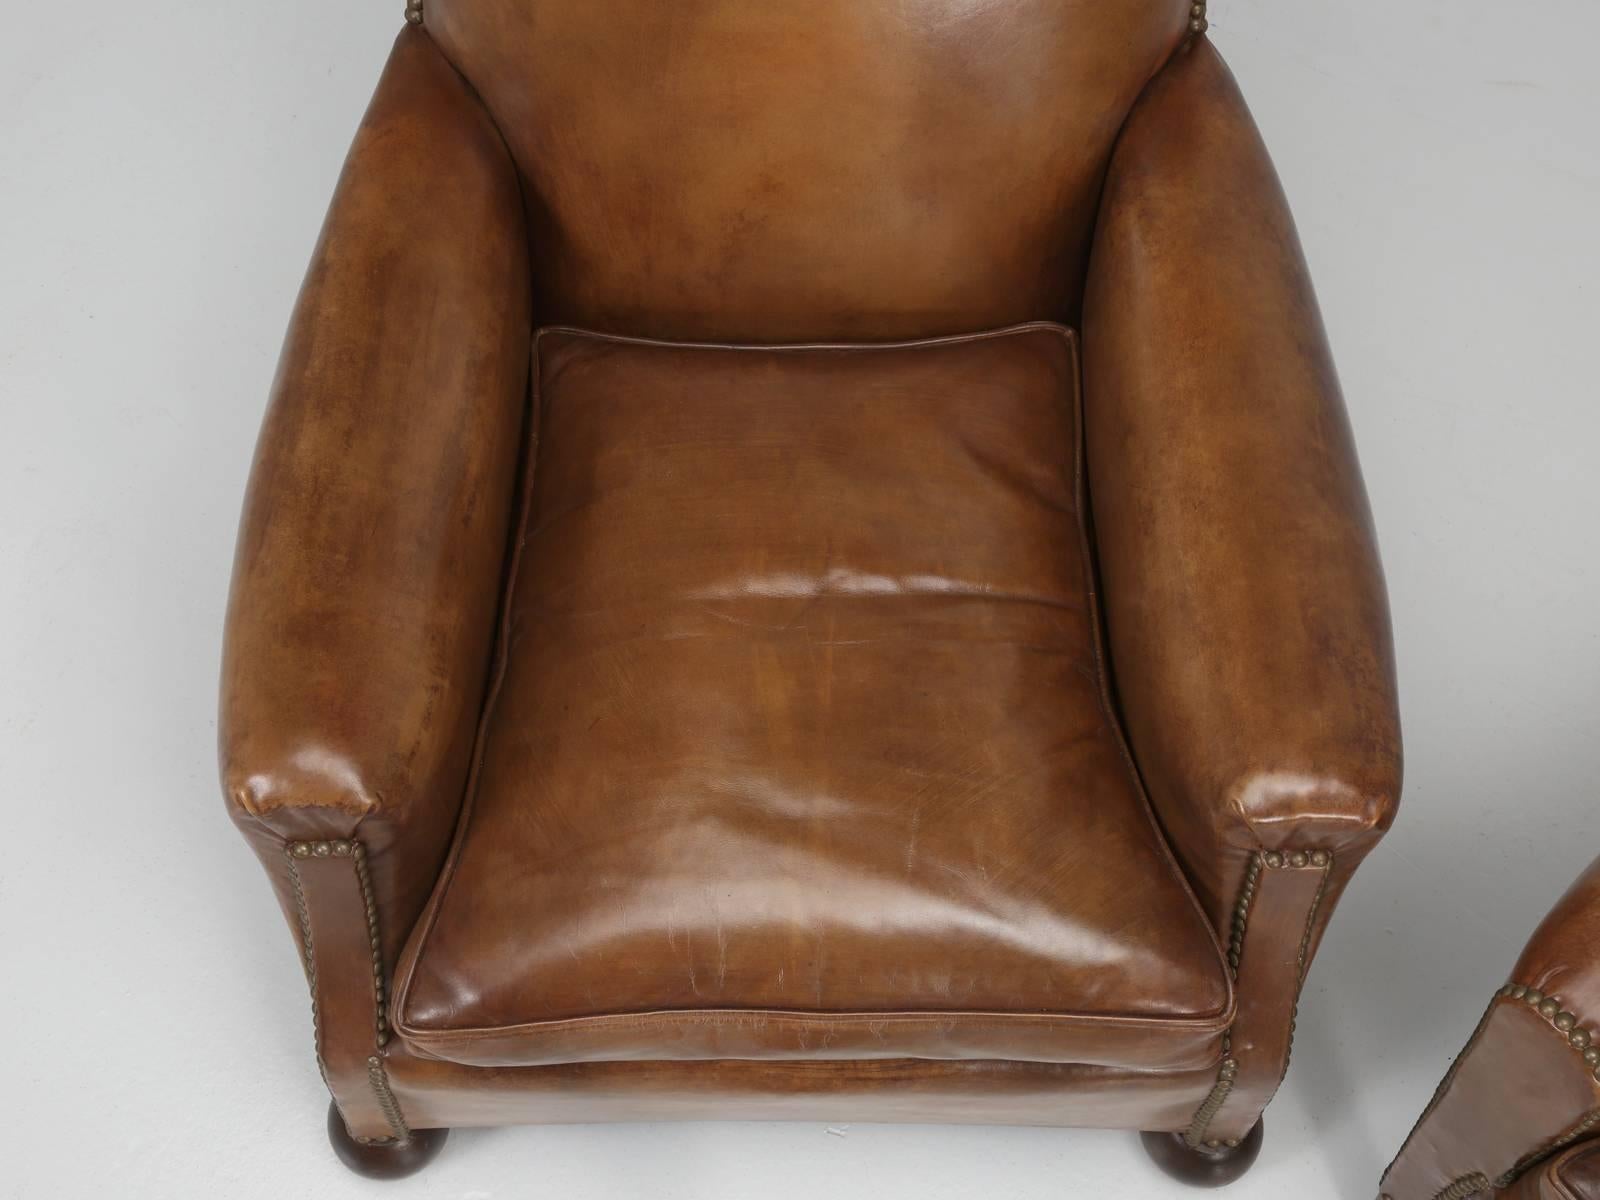 Mid-20th Century French Art Deco Leather Club Chairs, Restored to a High Standard, Down Cushions